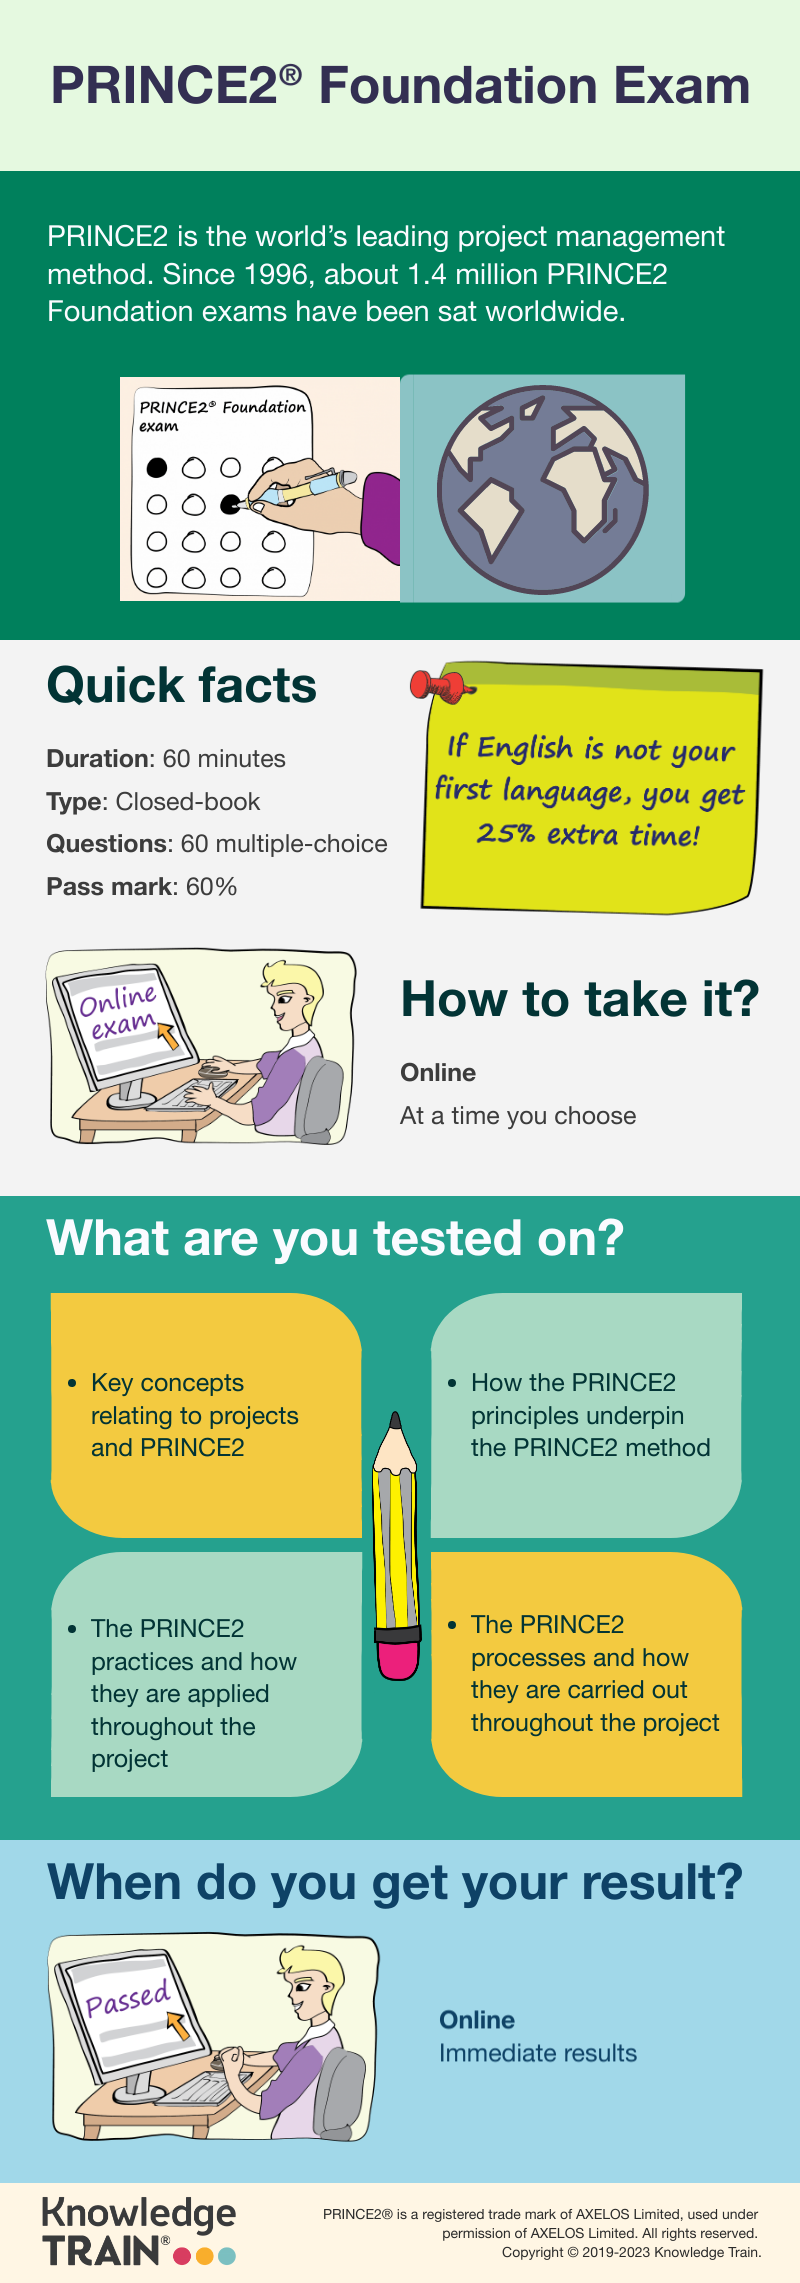 Infographic about the PRINCE 2 Foundation exam.